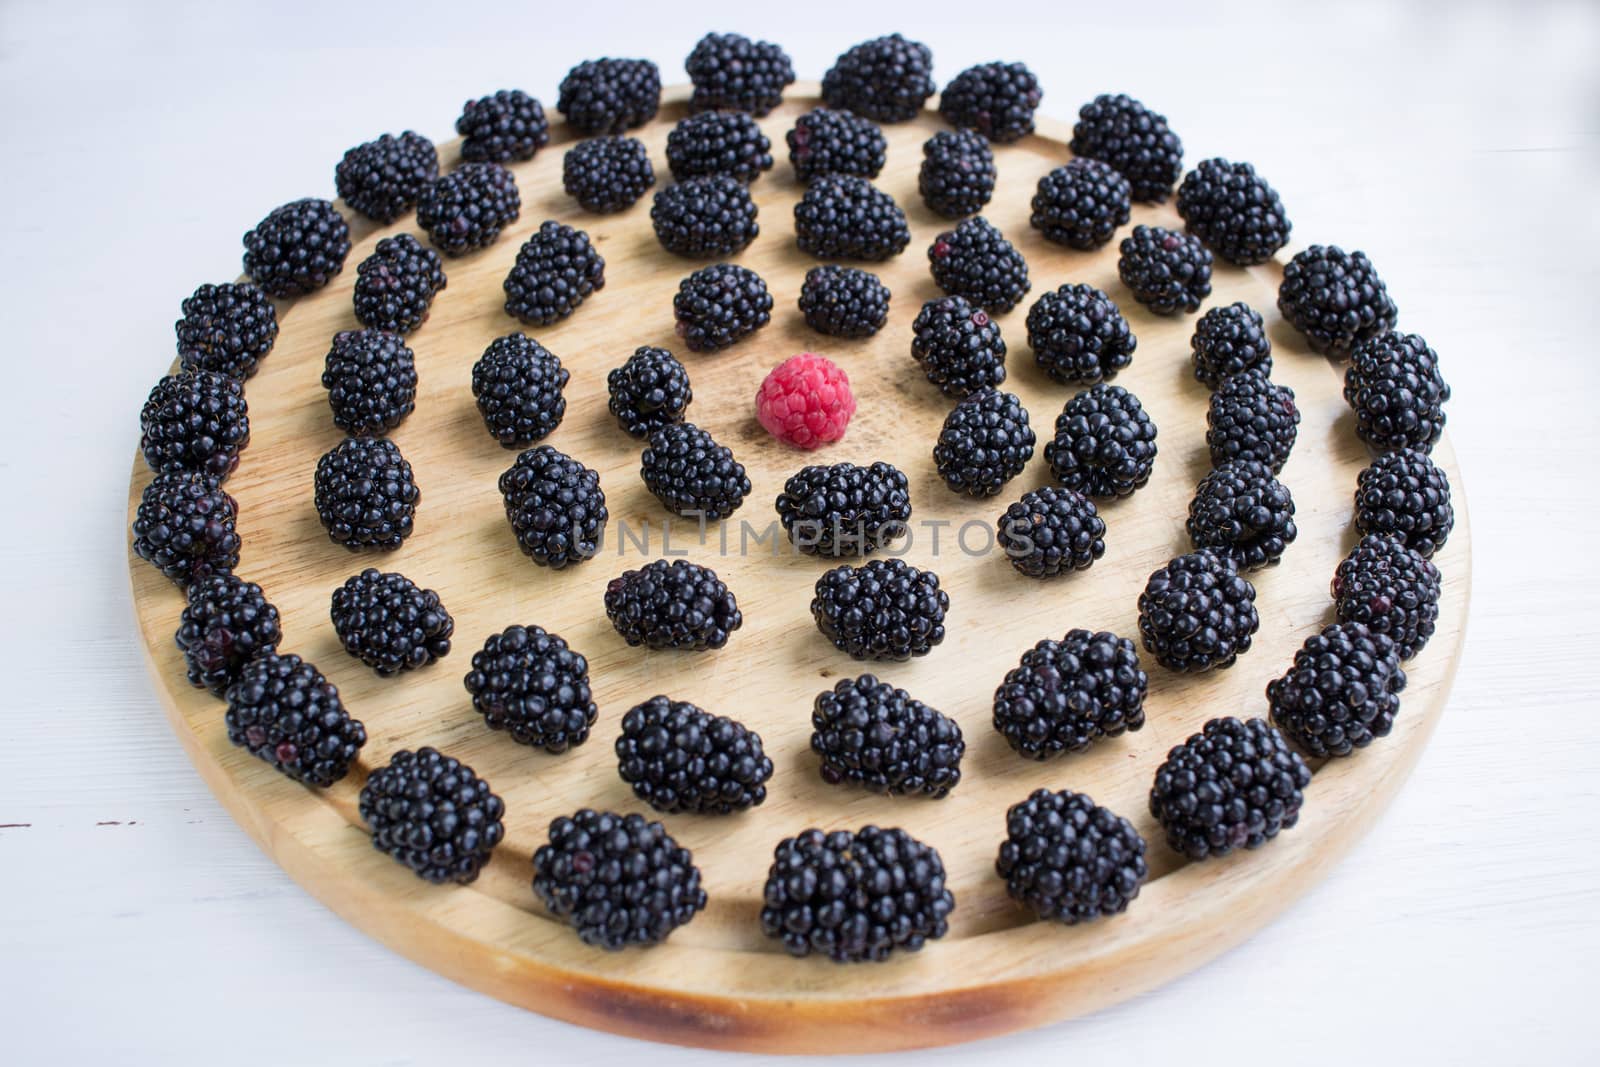 Set of blackberries and one raspberry on round wooden tray by VeraVerano